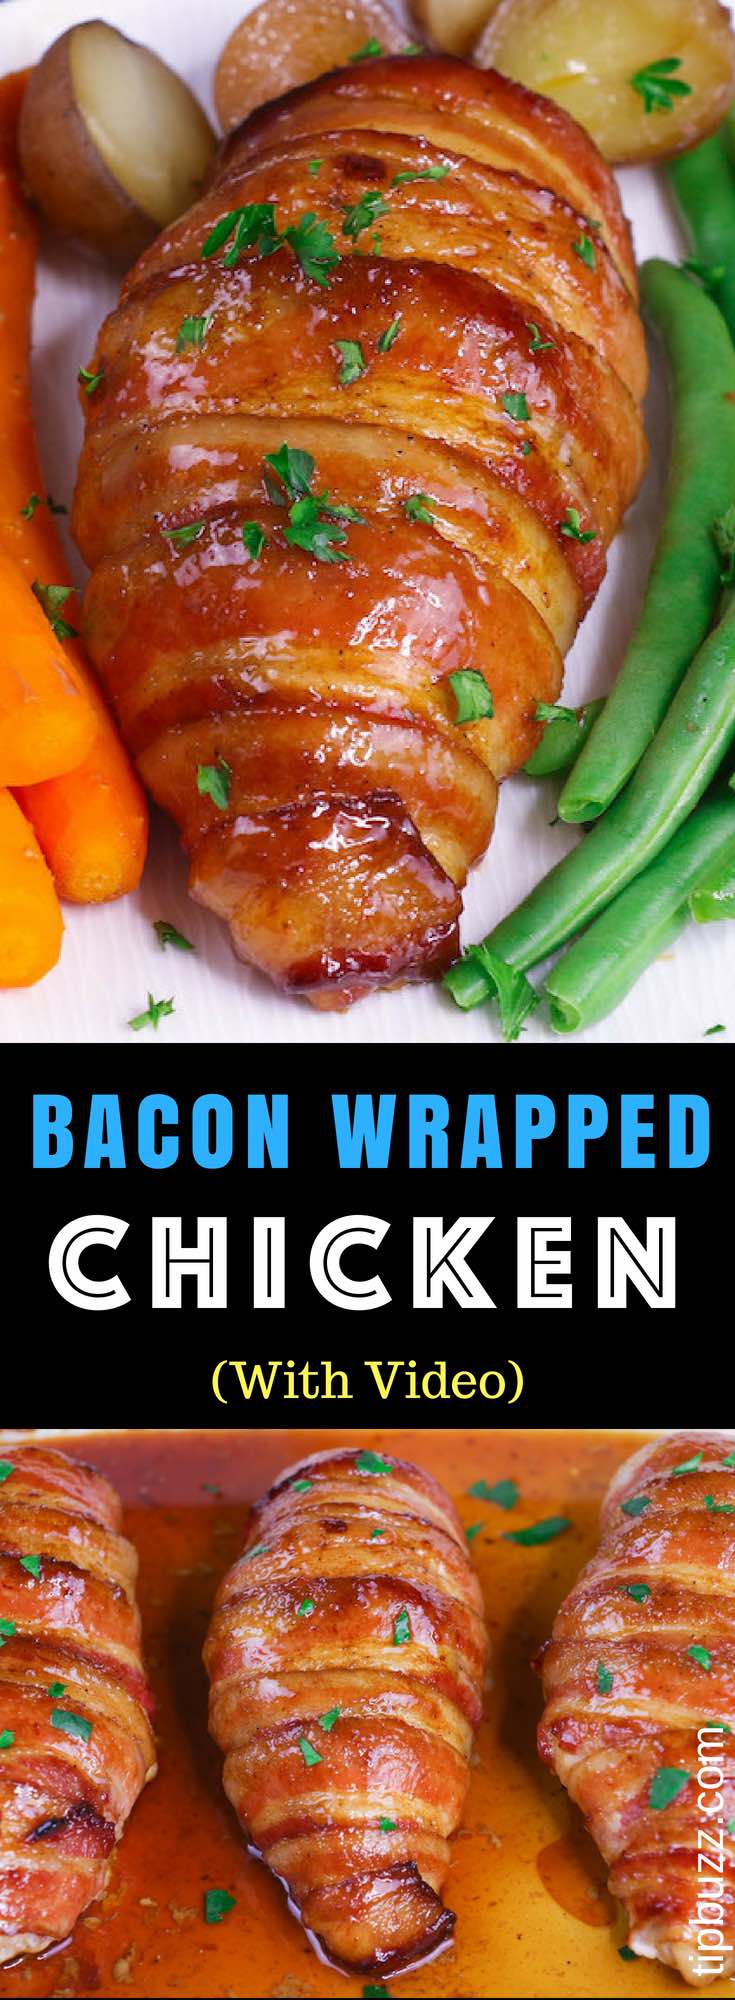 Brown Sugar Bacon Wrapped Chicken Breasts: a simple recipe that everyone will love. Chicken is rubbed with brown sugar and seasonings, wrapped in bacon and baked to golden crispy perfection! So juicy and flavorful. Quick and Easy Dinner. Video Recipe #BaconChicken #BaconWrappedChicken